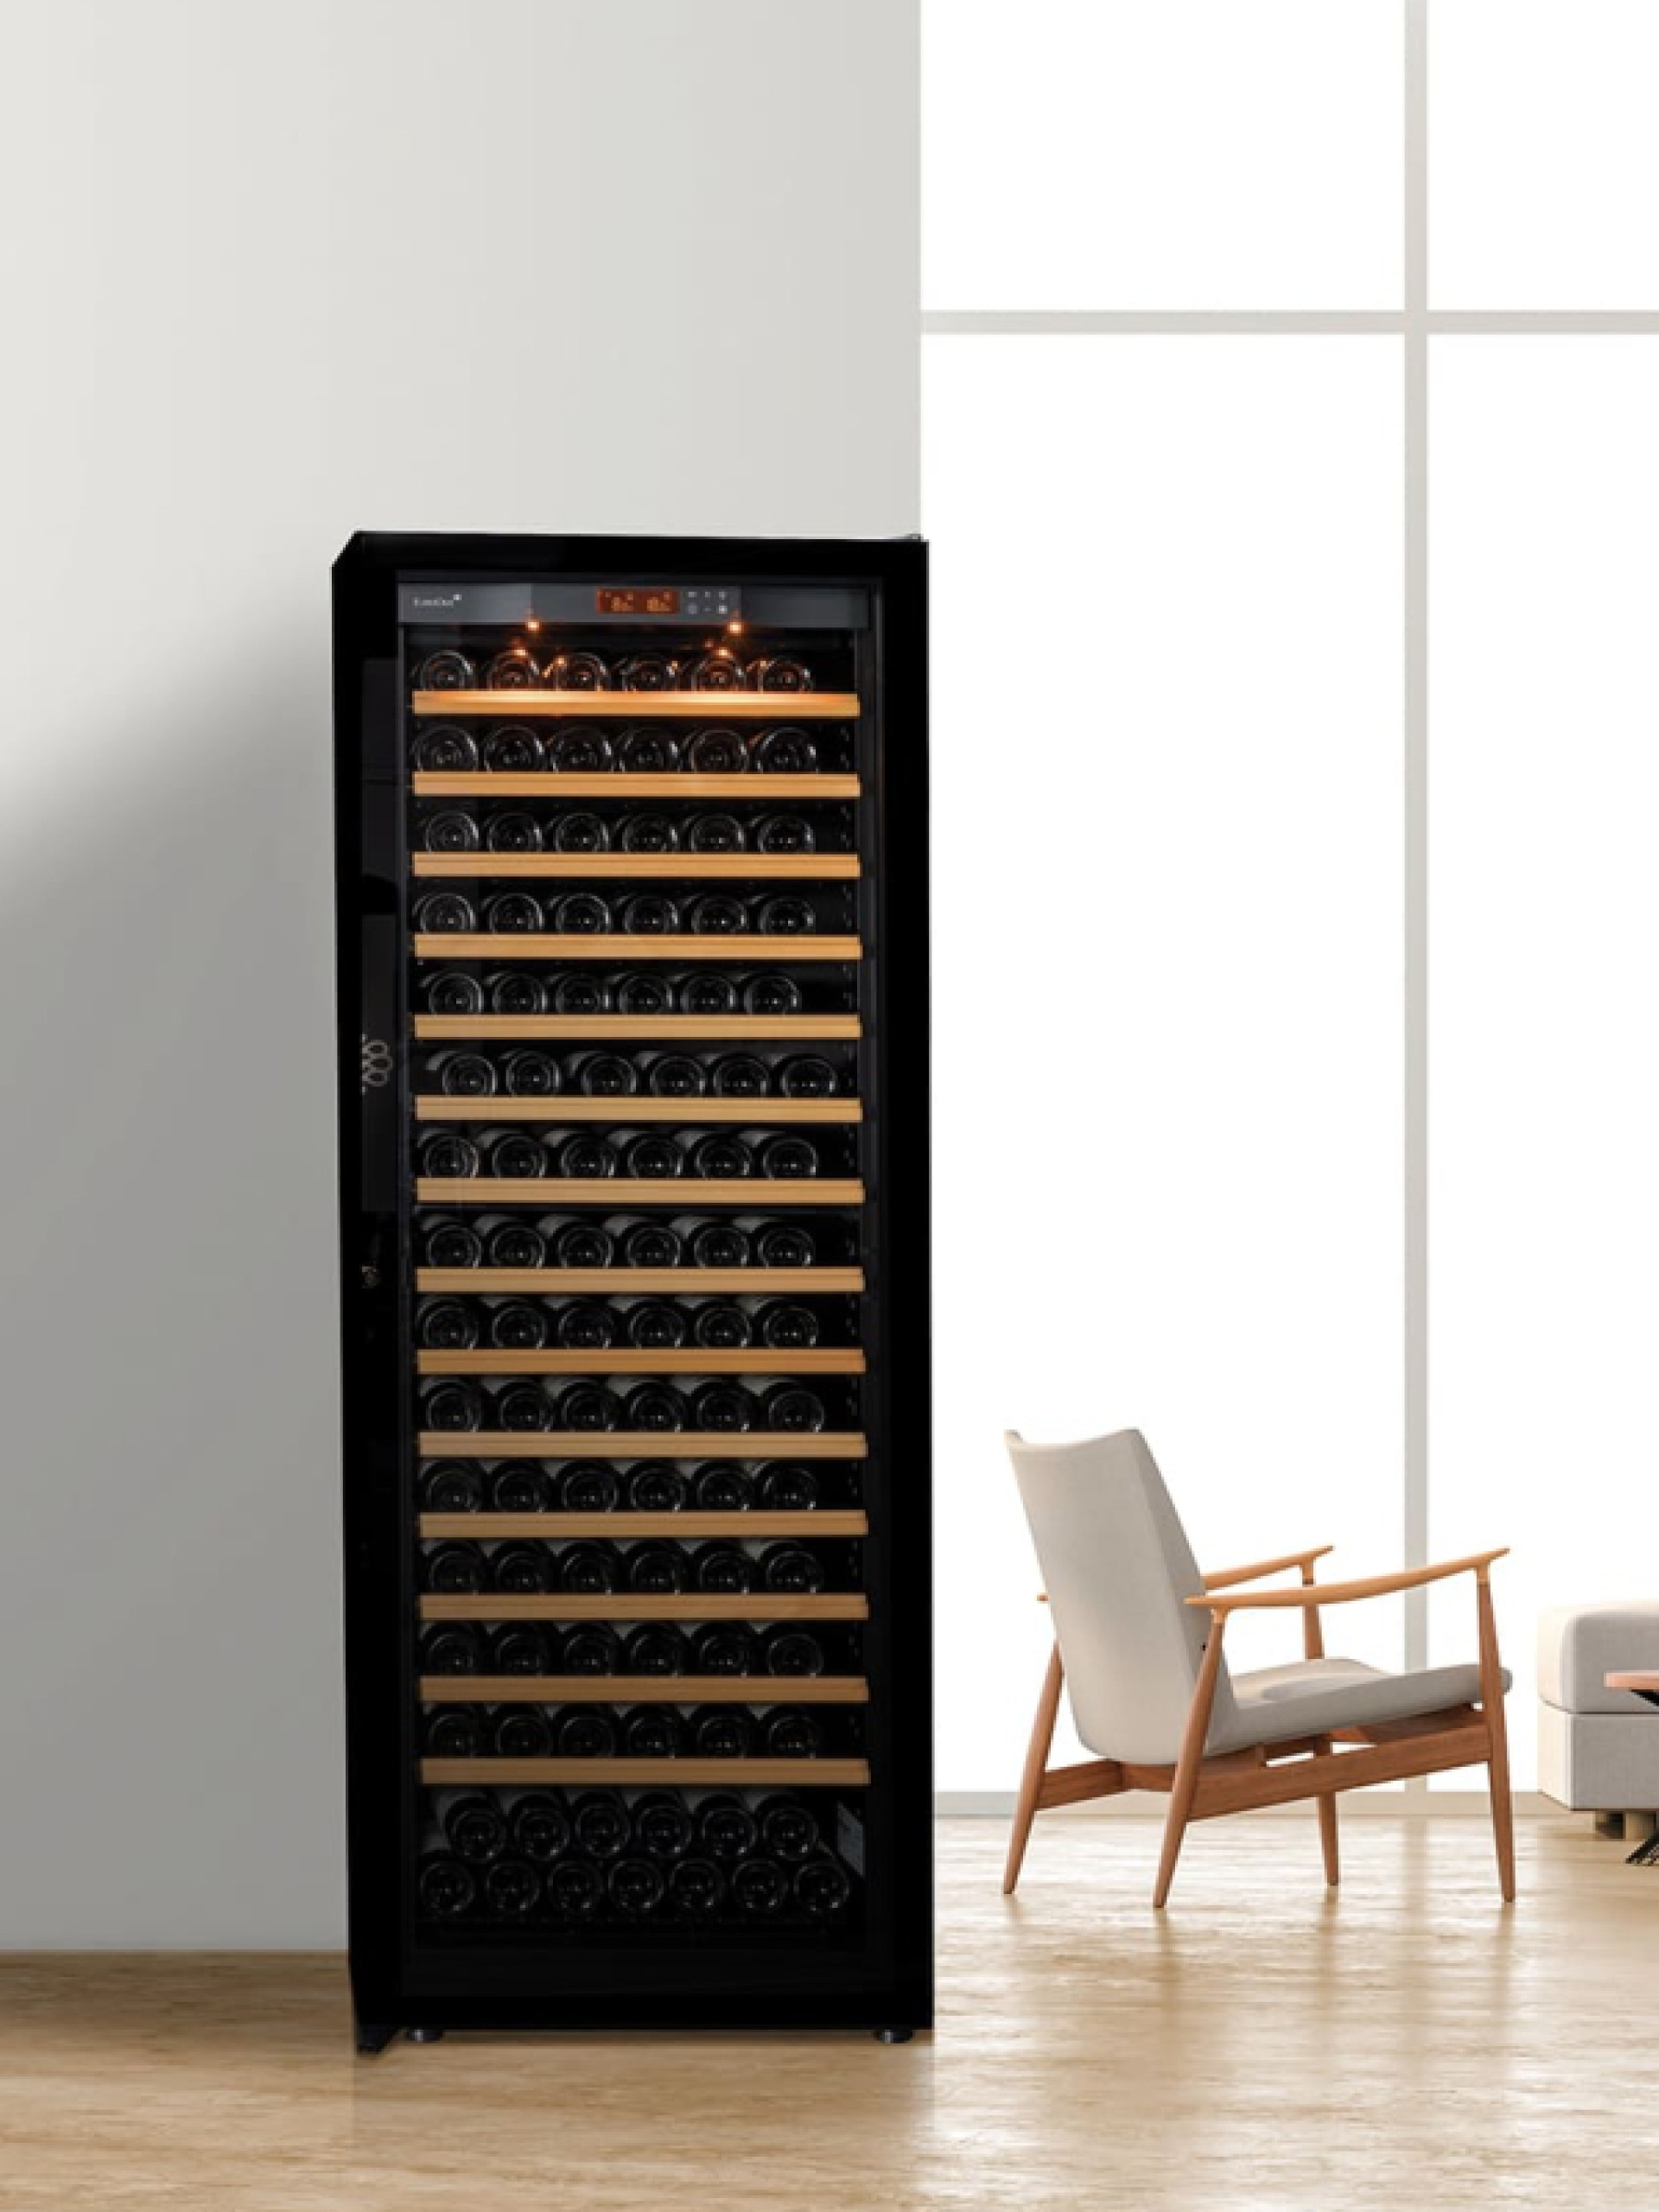 Air-conditioned wine cabinet installed in a living room for wines at the right temperature always available for a good improvised meal. - Pure EuroCave